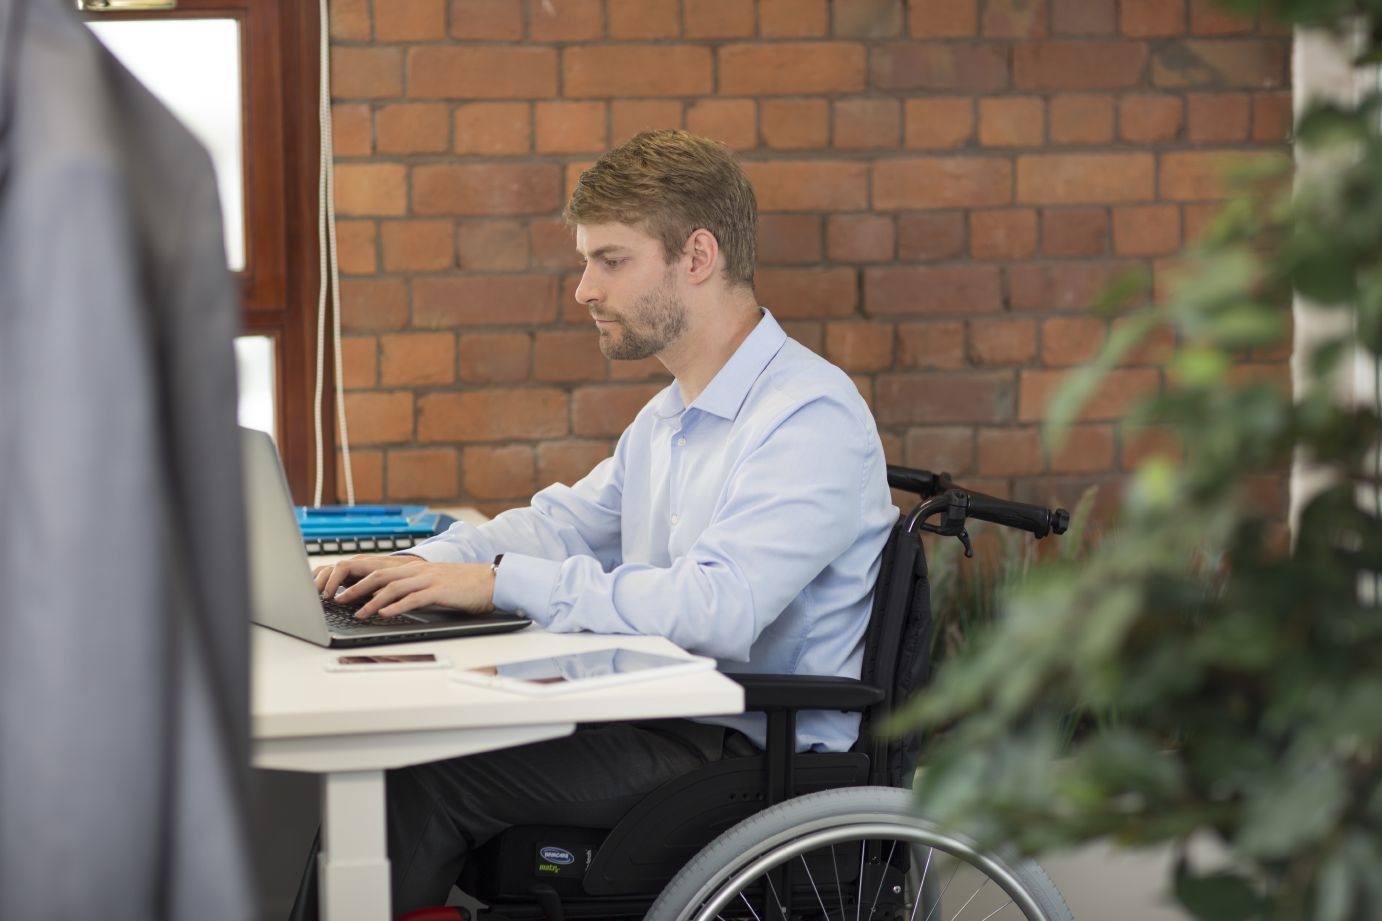 Adapting for Disability in the Workplace and dealing with Discrimination